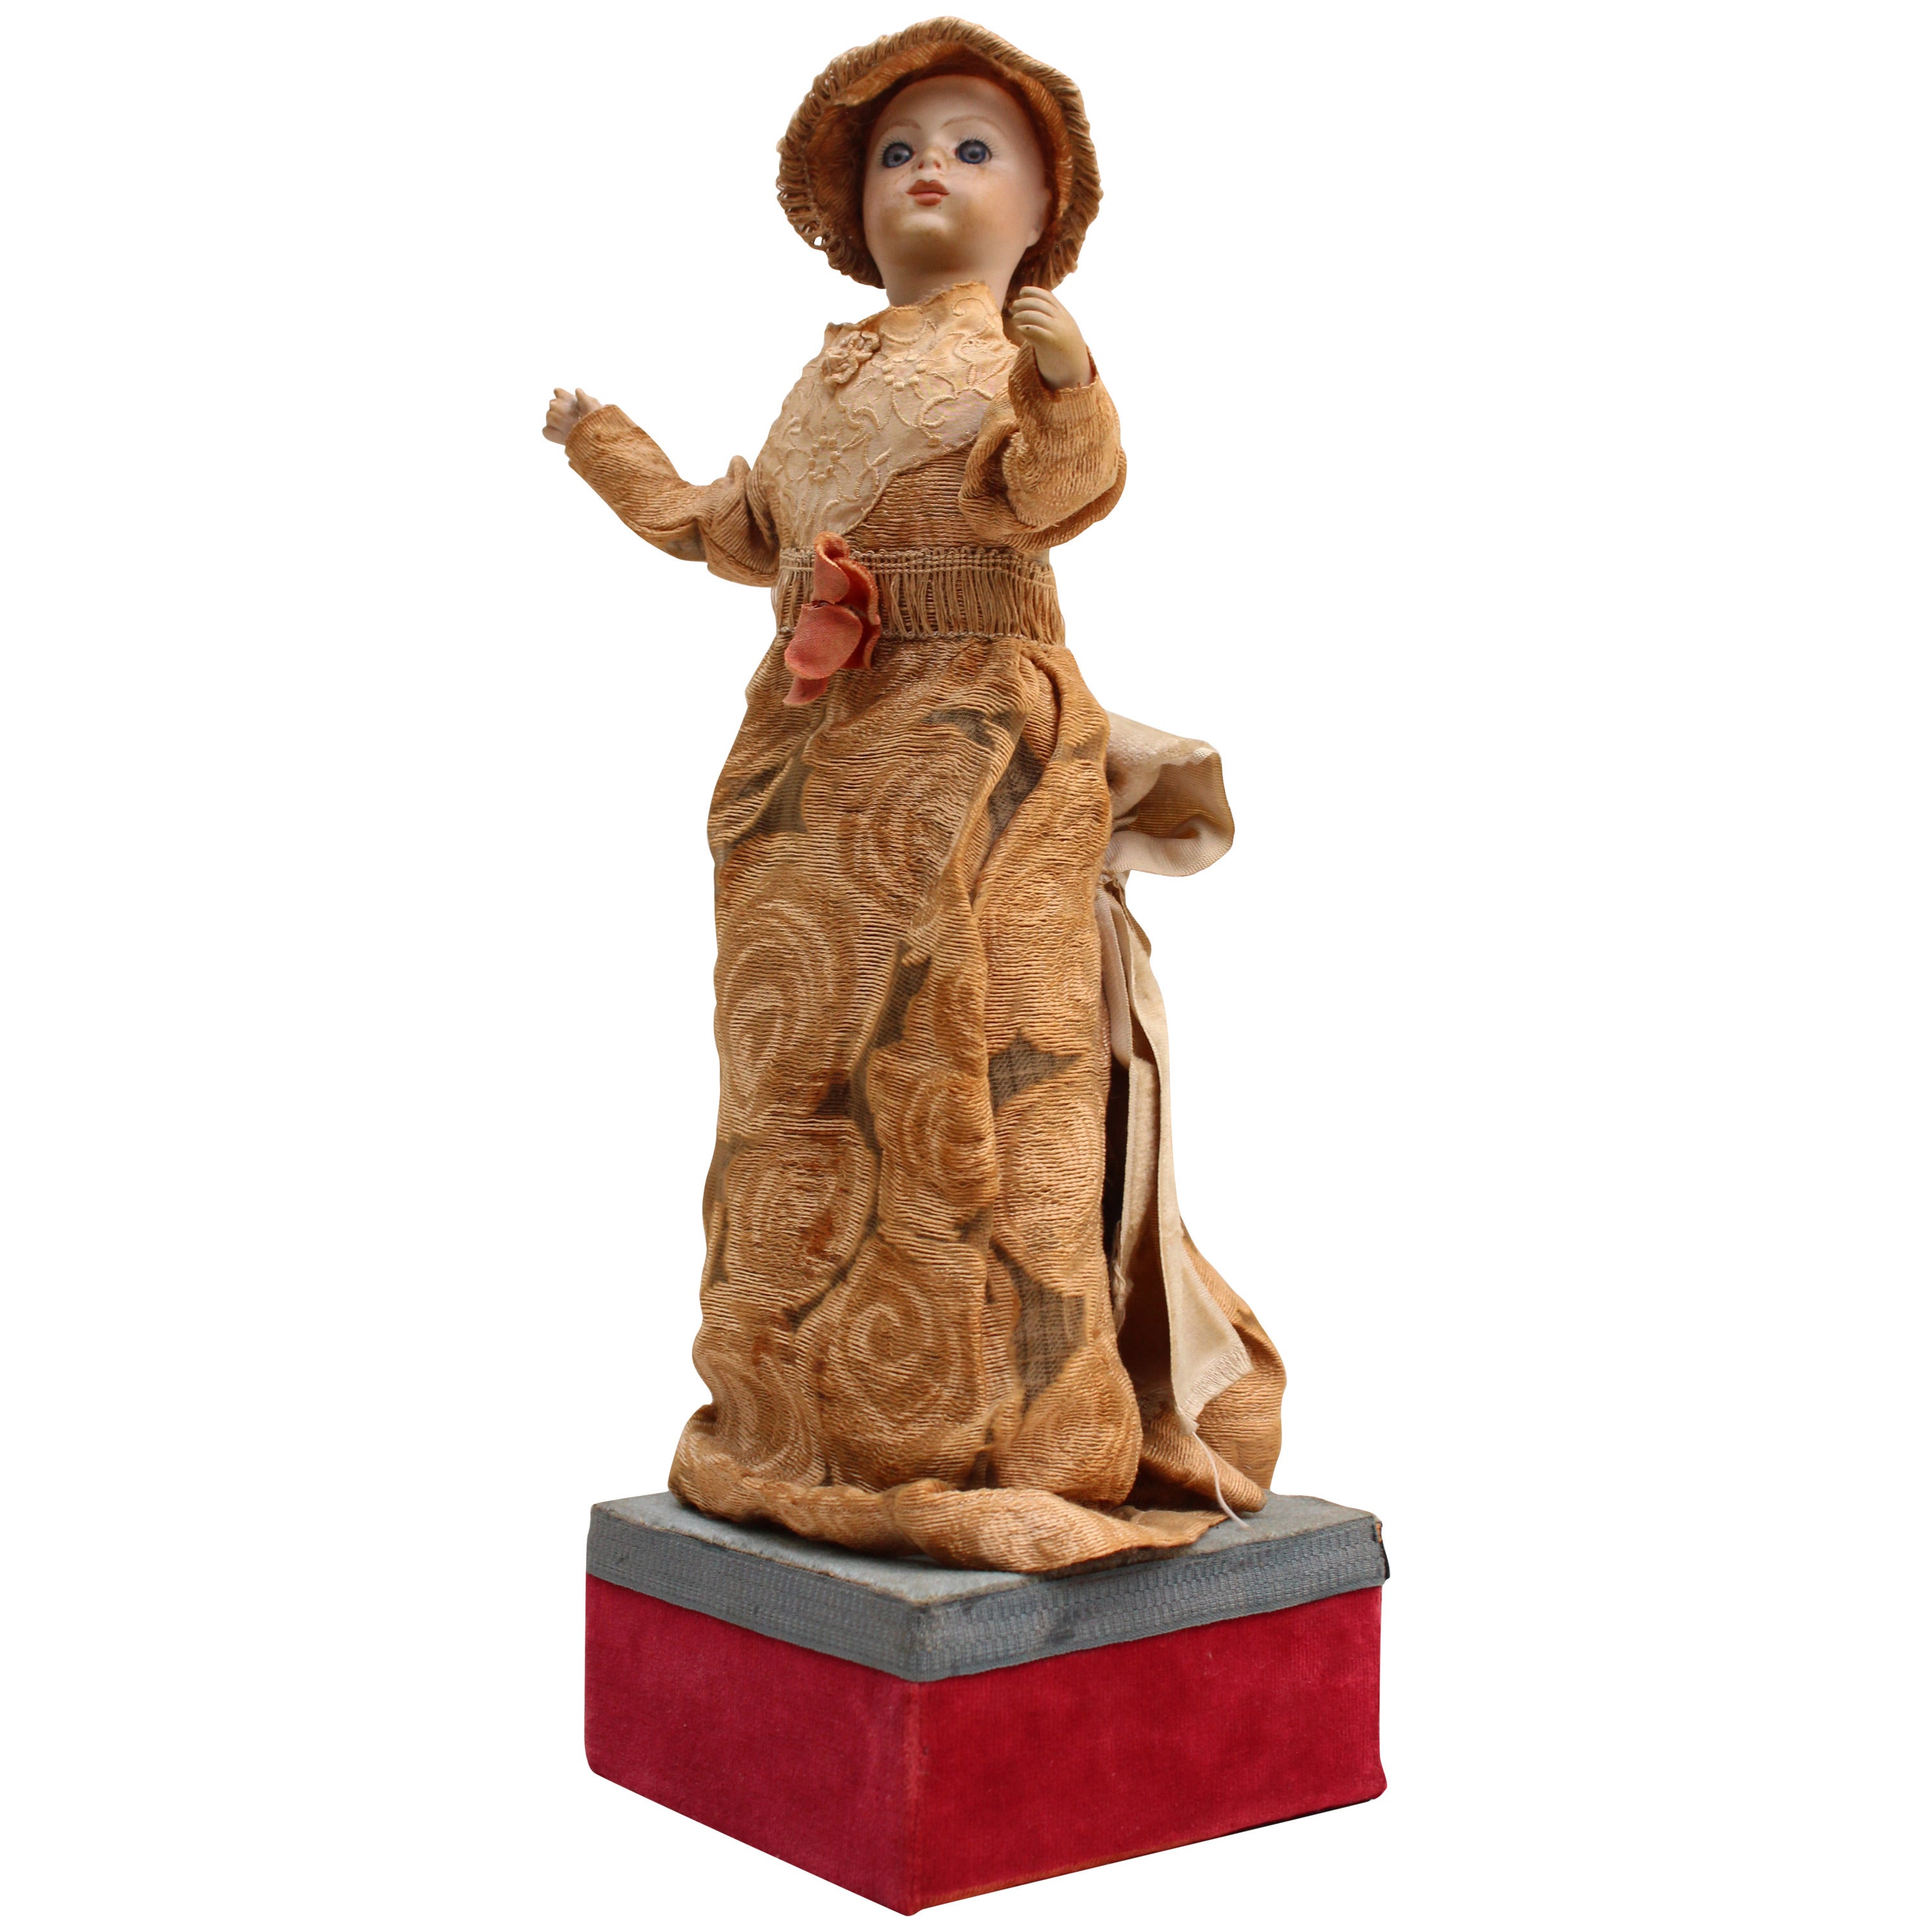 Mechanical Doll with Music Box by Bru, Late 19th Century